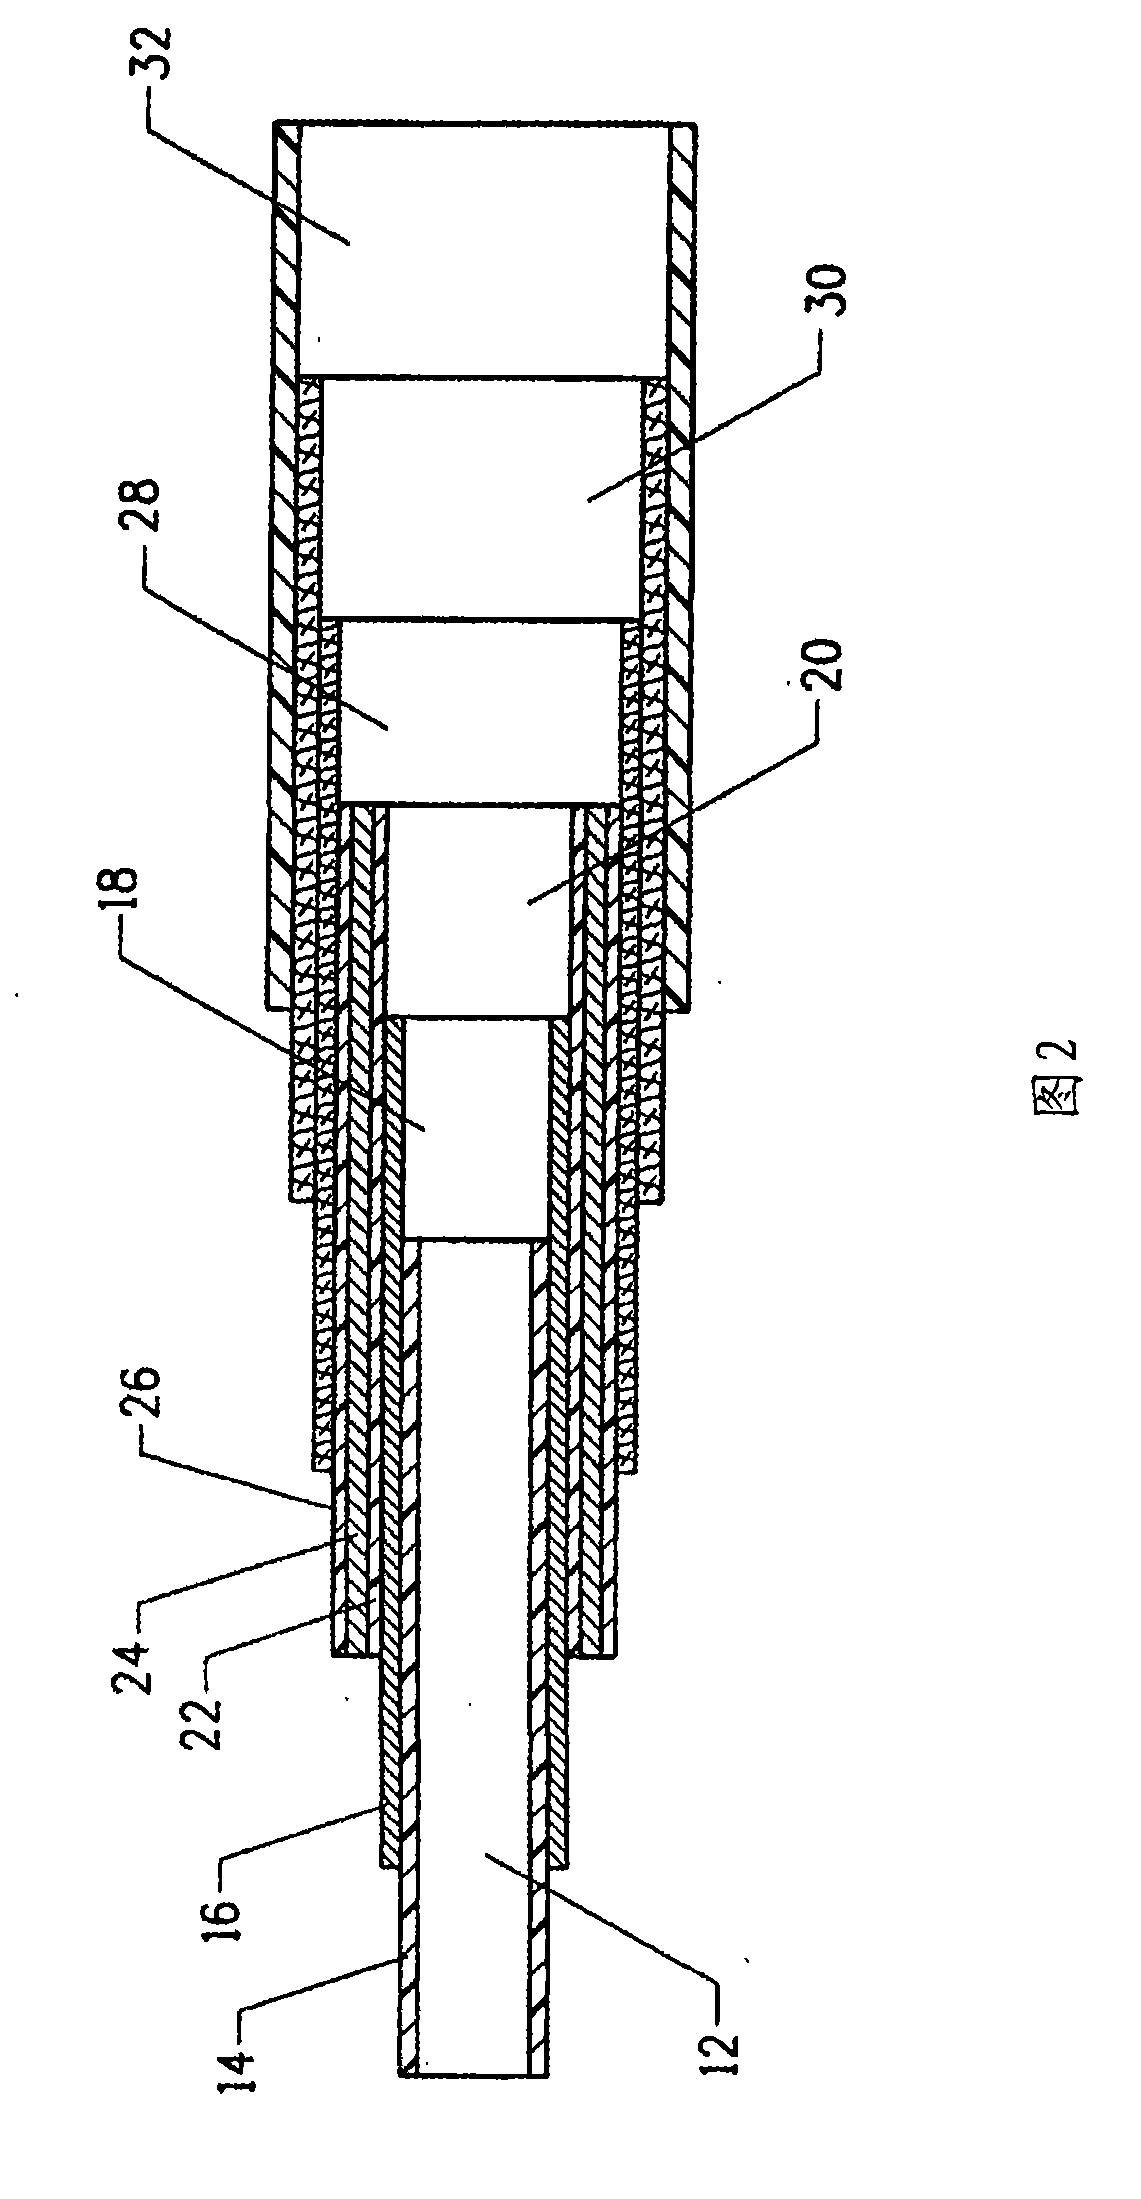 Method for circulating selected heat transfer fluids through a closed loop cycle